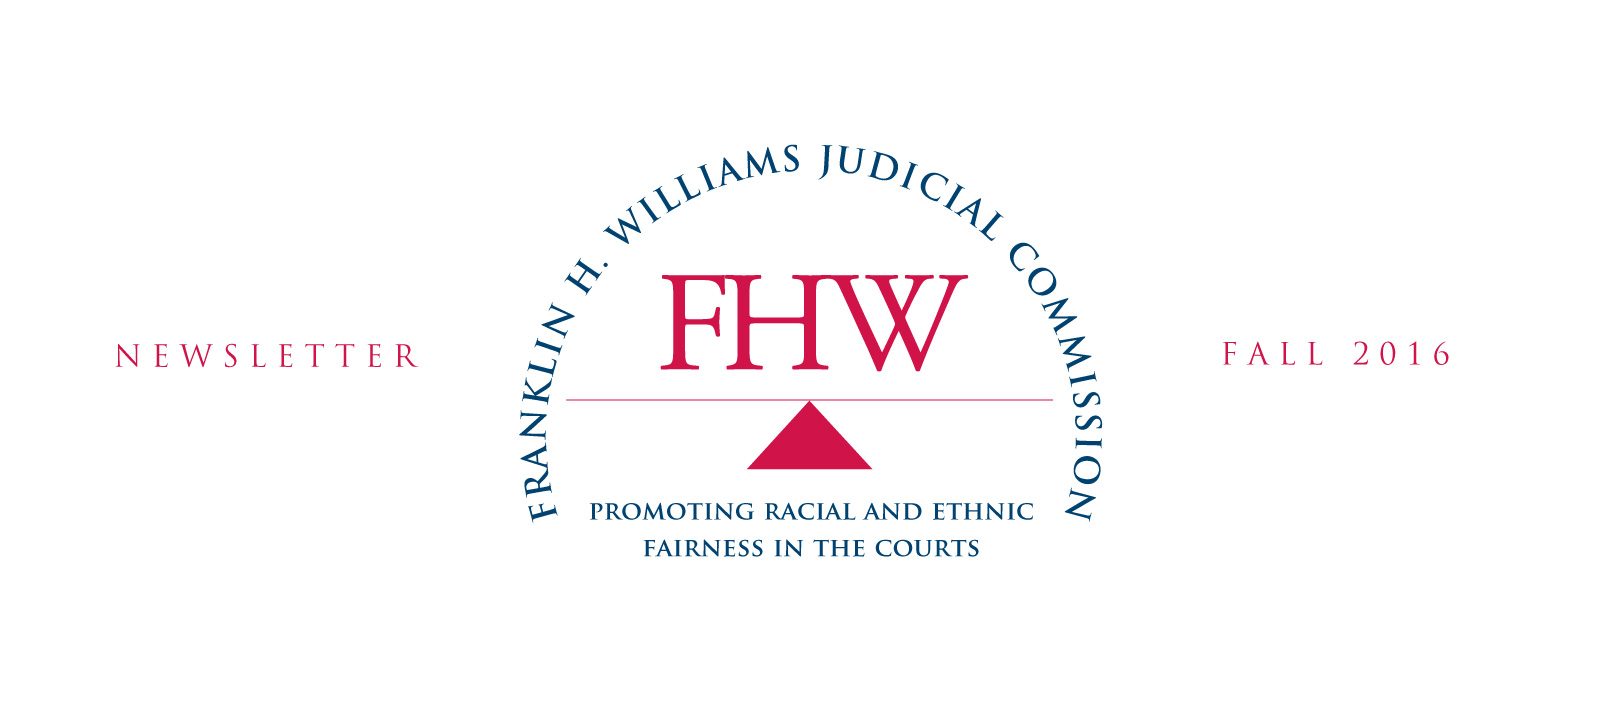 Franklin H. Williams Judicial Commision - Promoting Racial and Ethical Fairness in the Courts